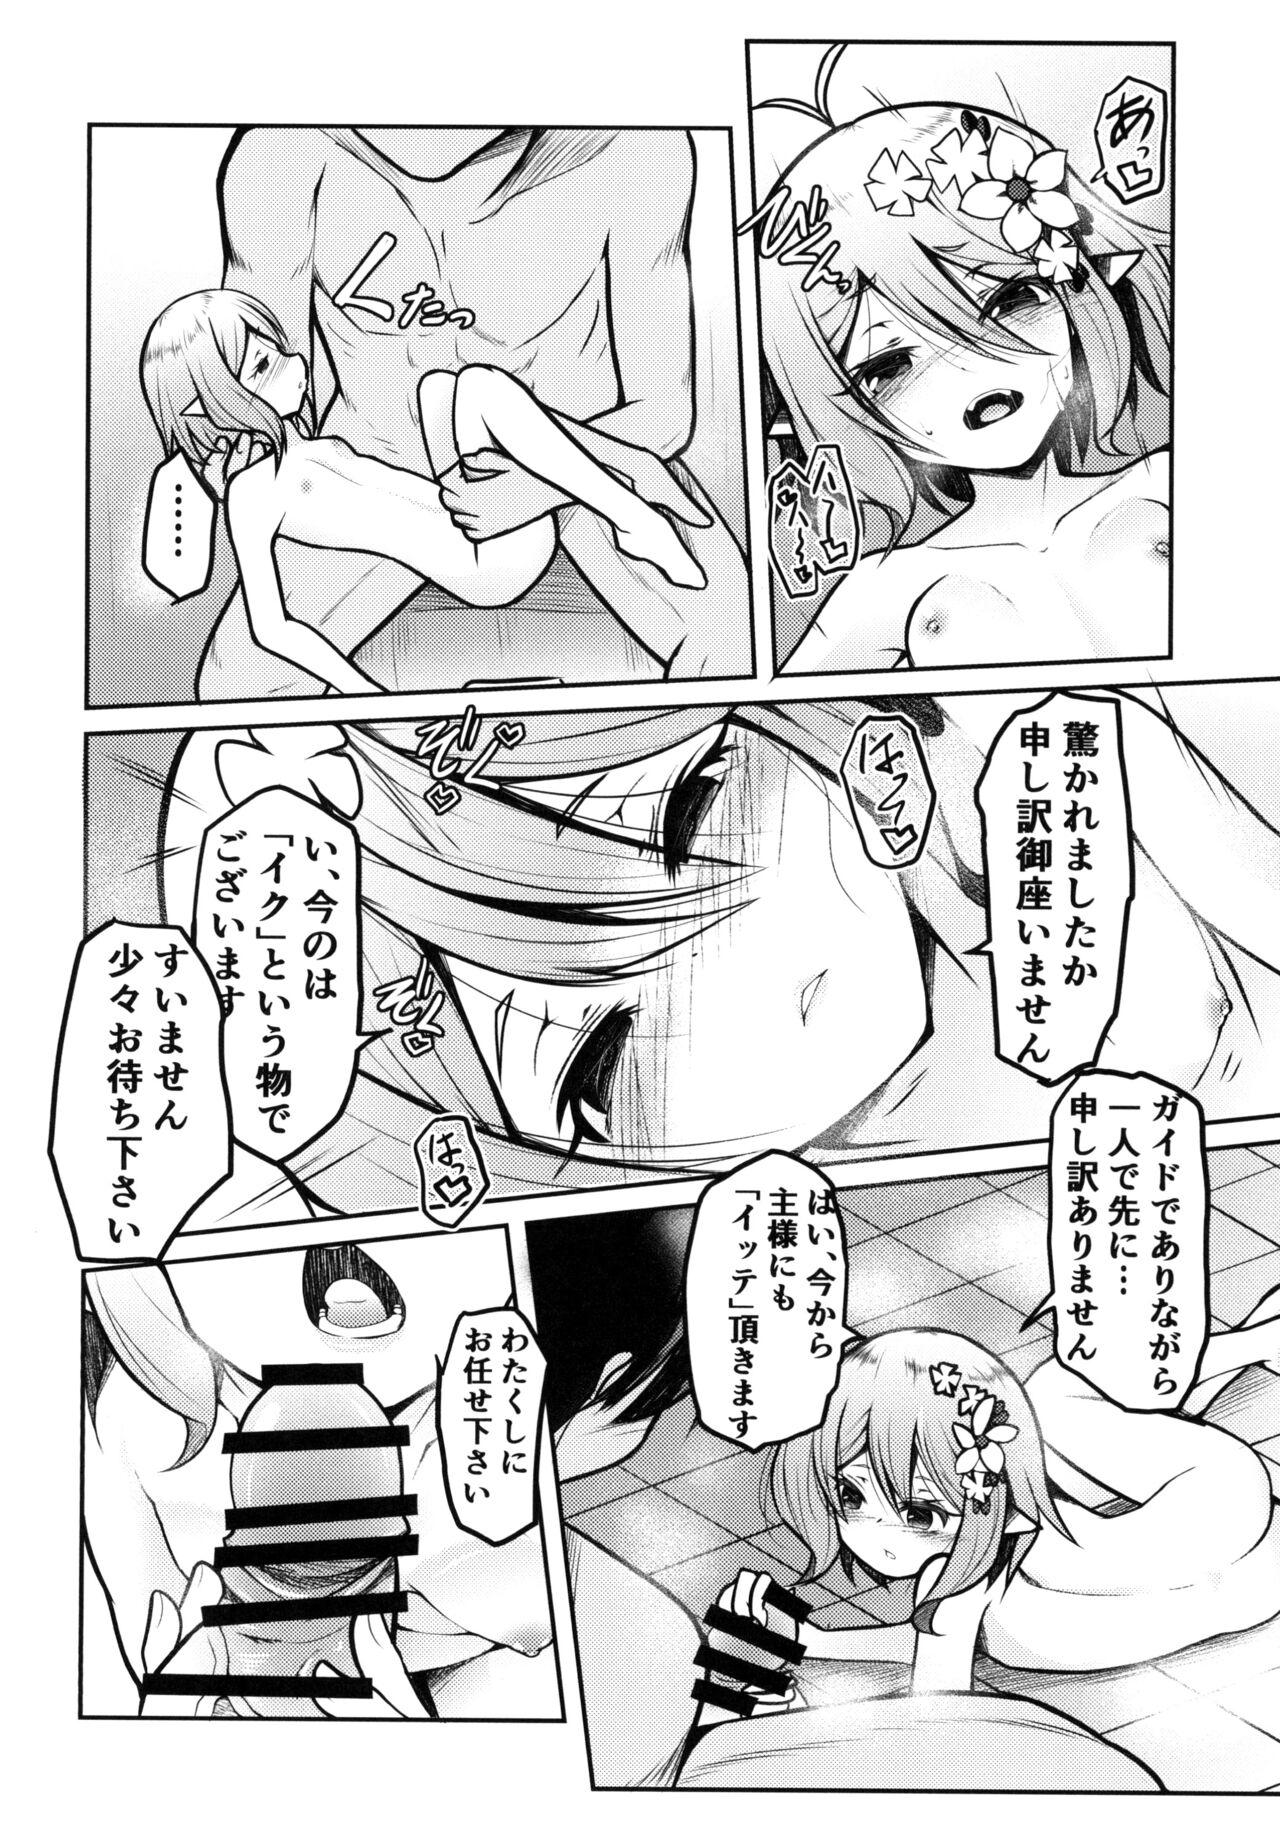 Master おべんきょしましょう主様!! - Princess connect Stripping - Page 10